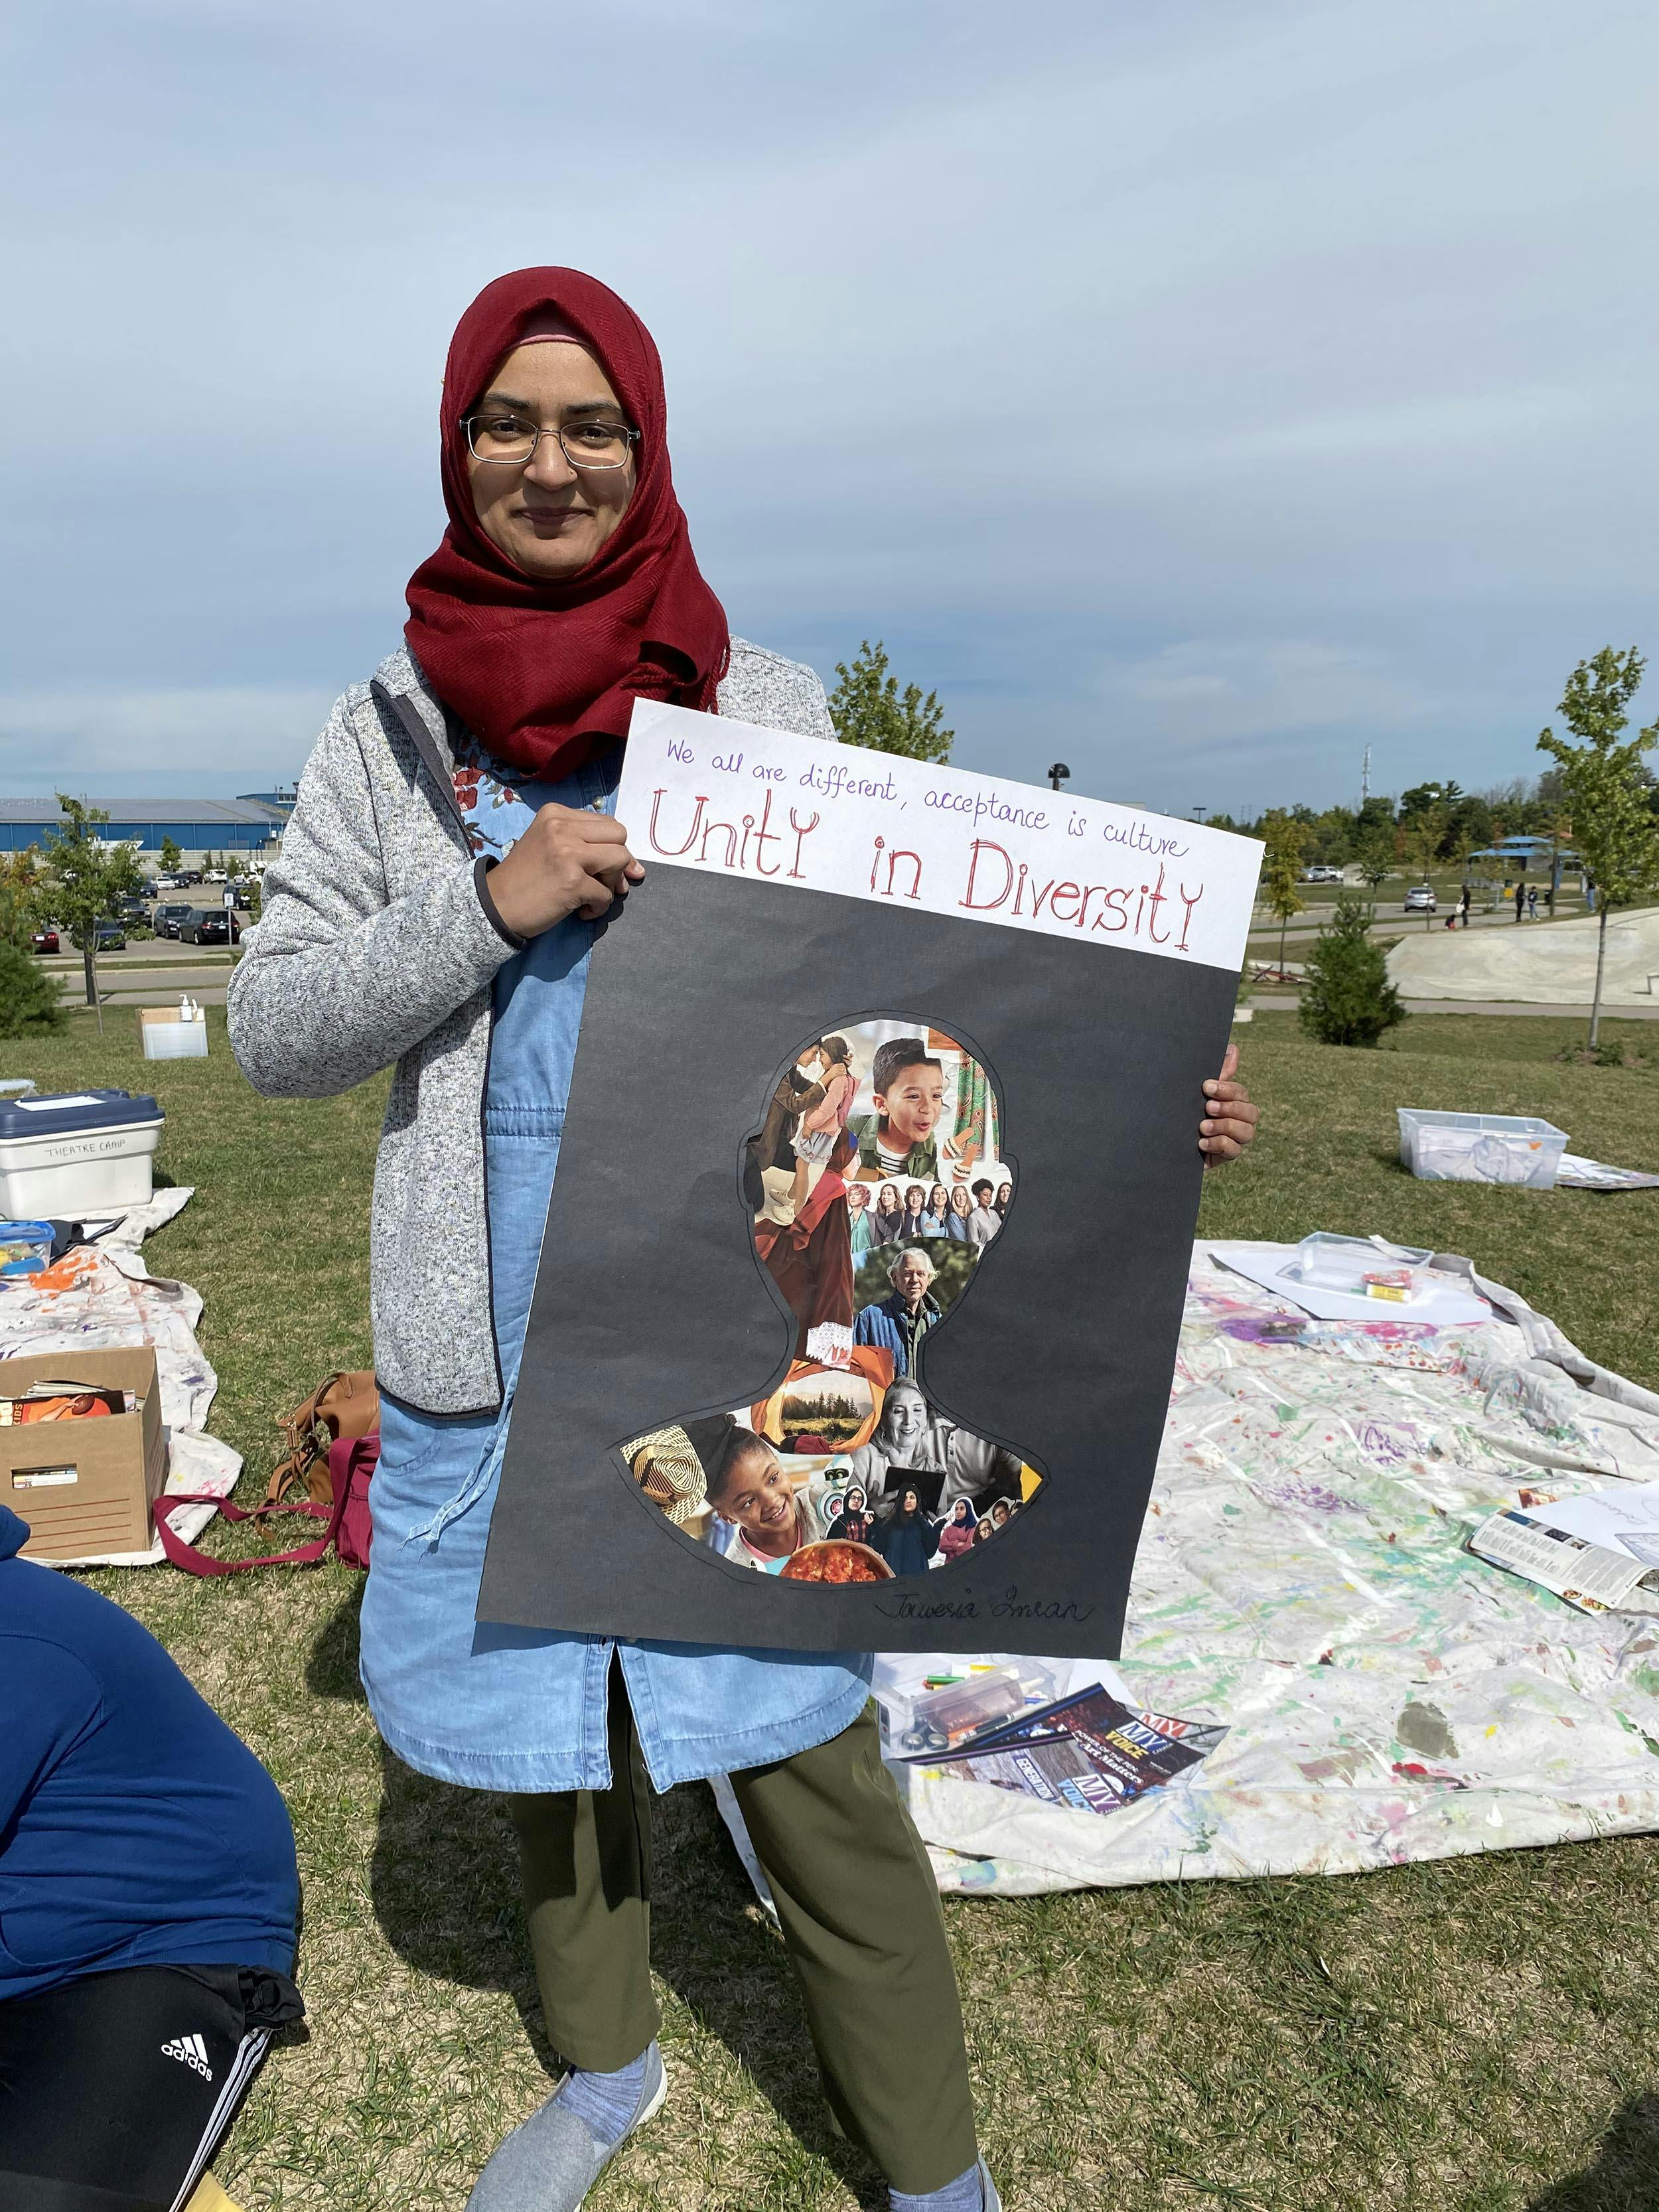 Jaweria showing her artwork - a collage of people demonstrating unity in diversity. 